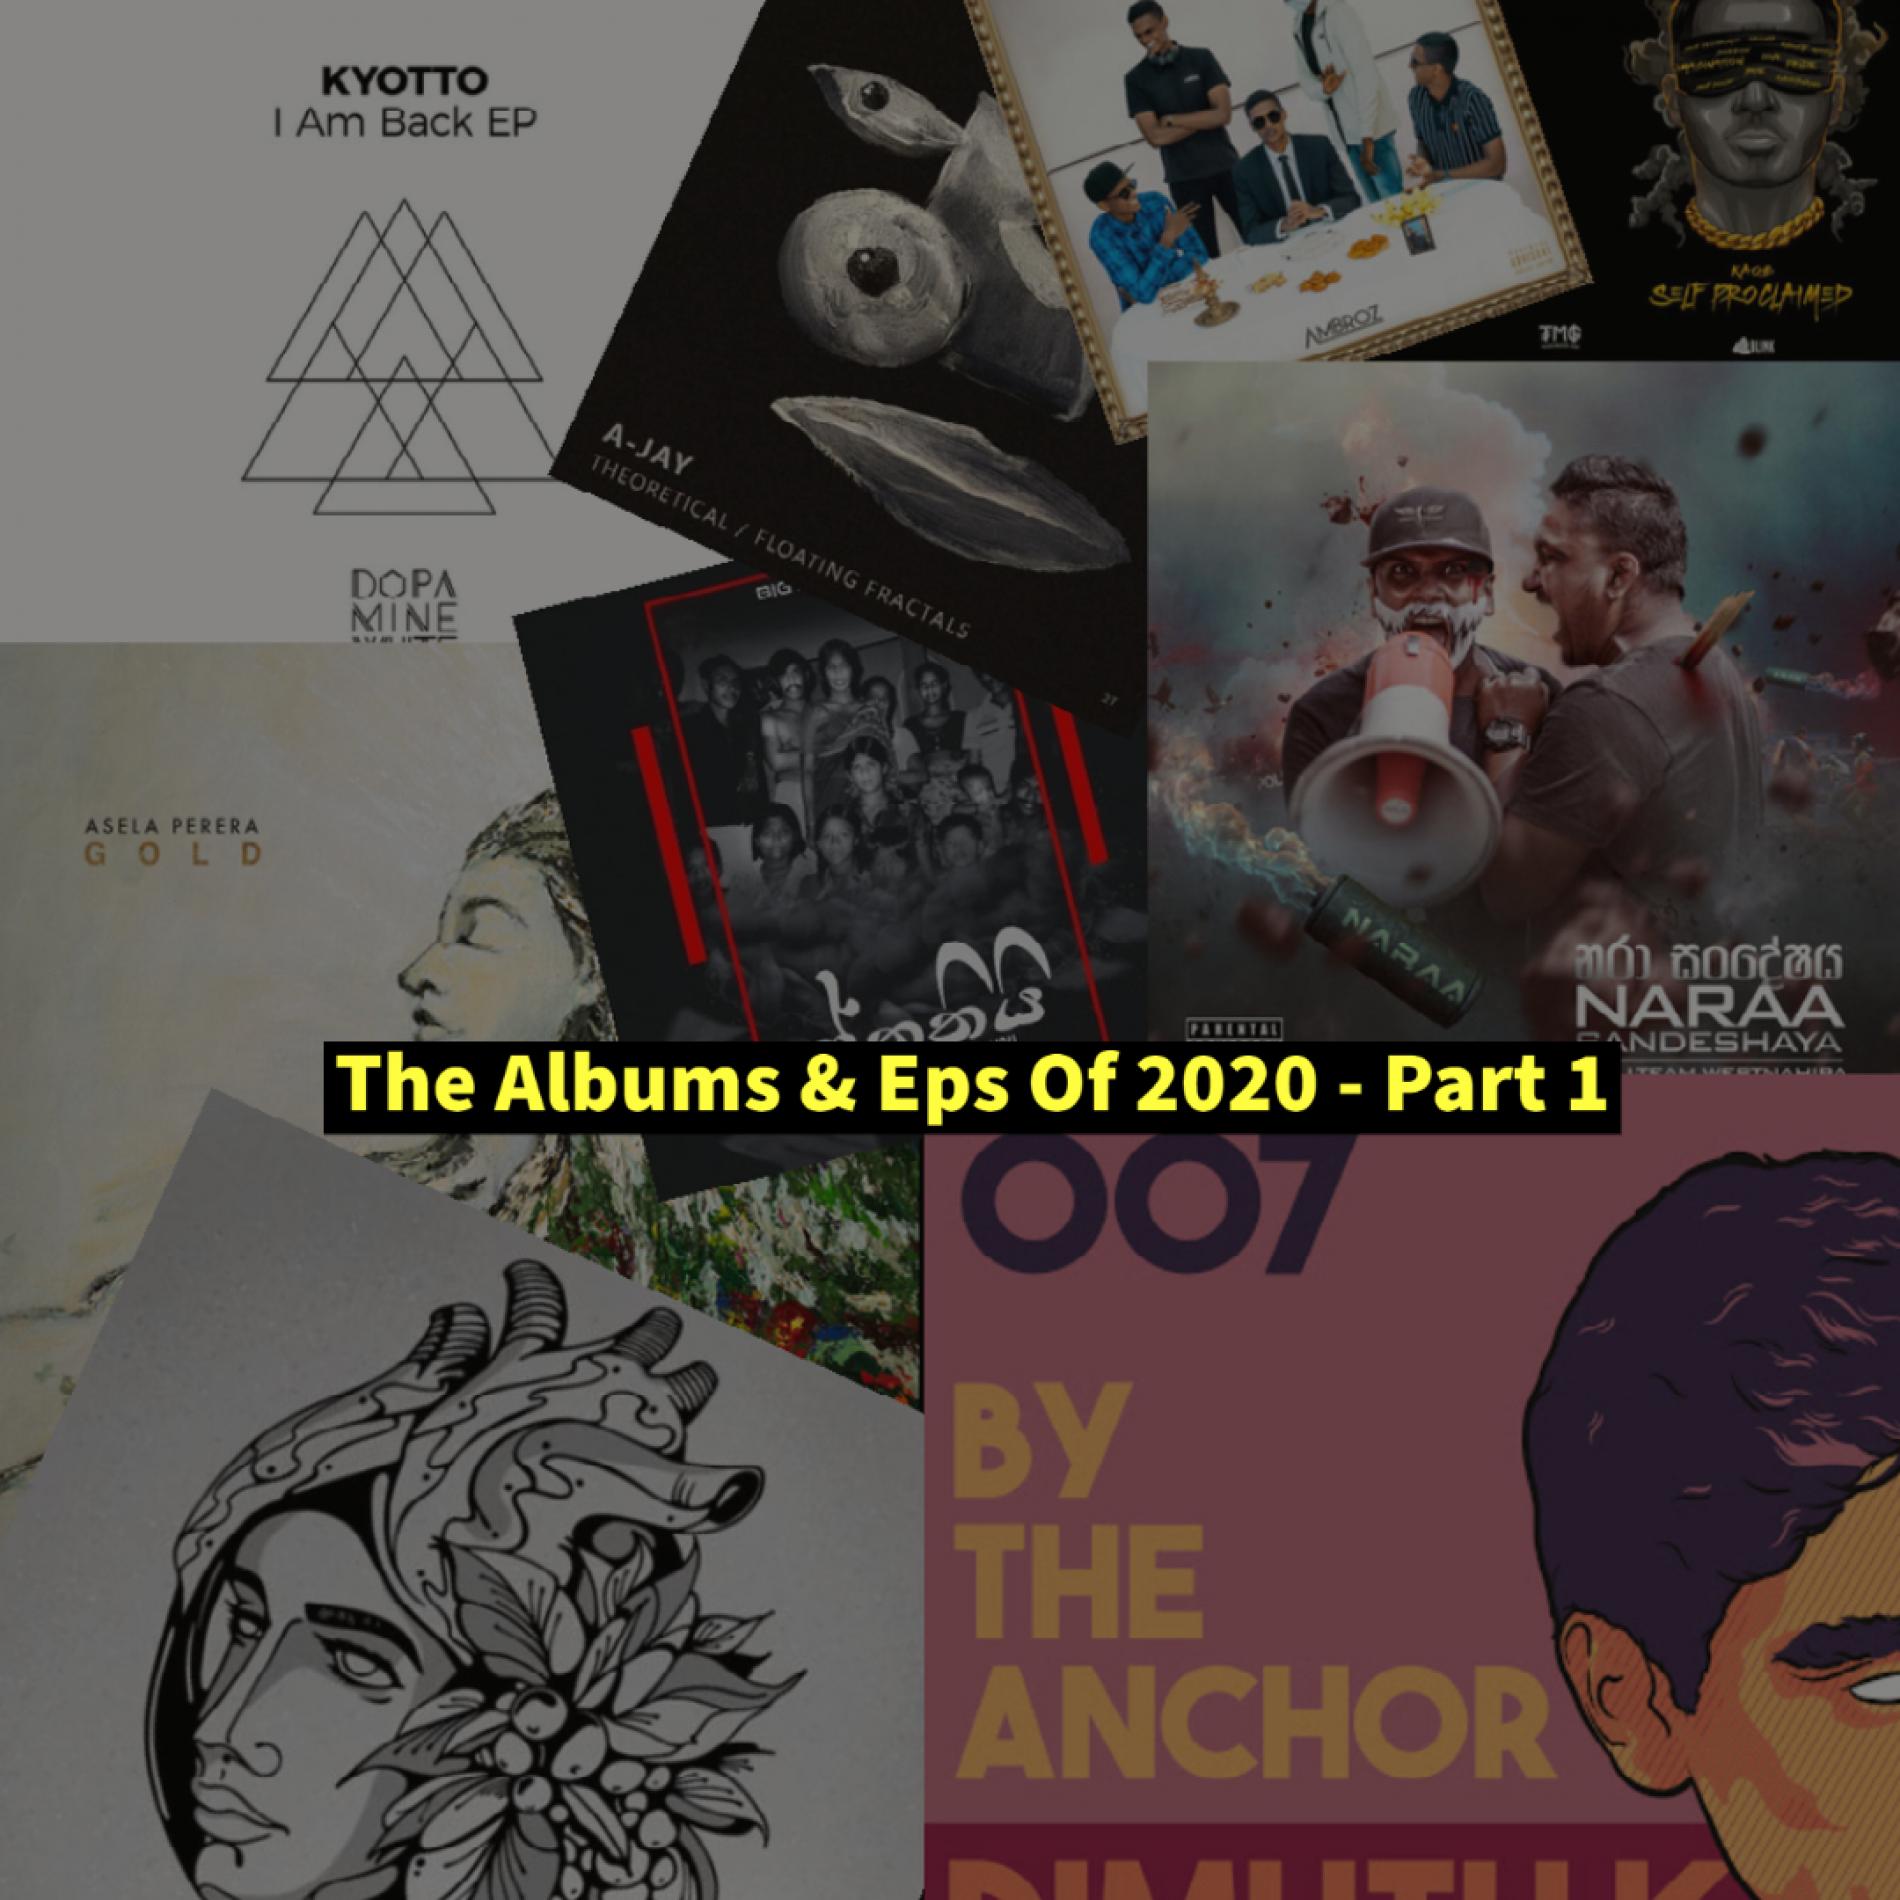 The Albums & Eps So Far Of 2020 – Part 1